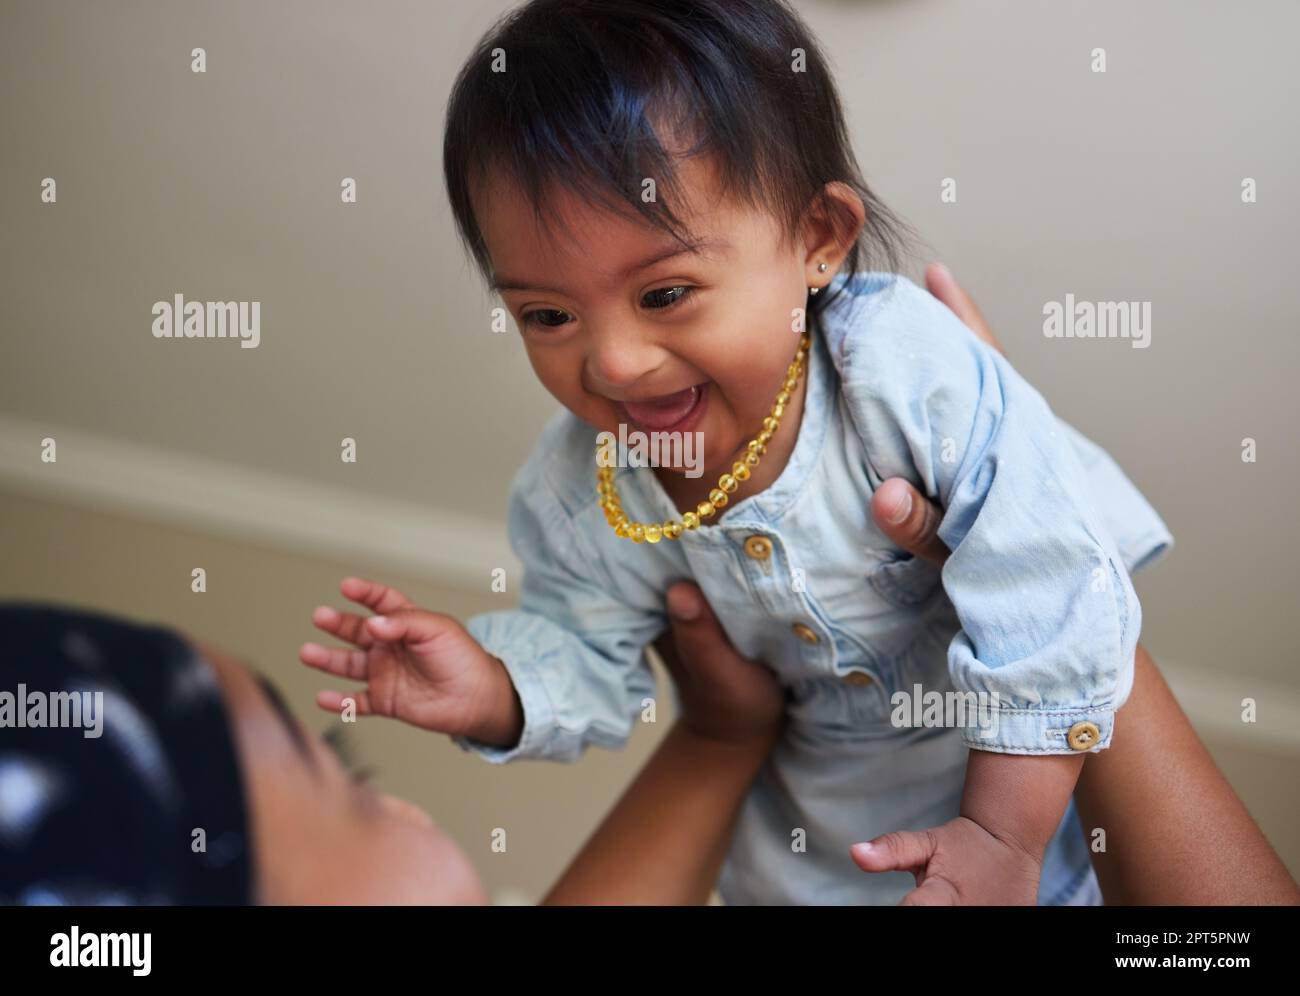 Children, down syndrome and fun with a girl and mother playing together in their home. Family, kids and disability with an adorable or cute daughter l Stock Photo